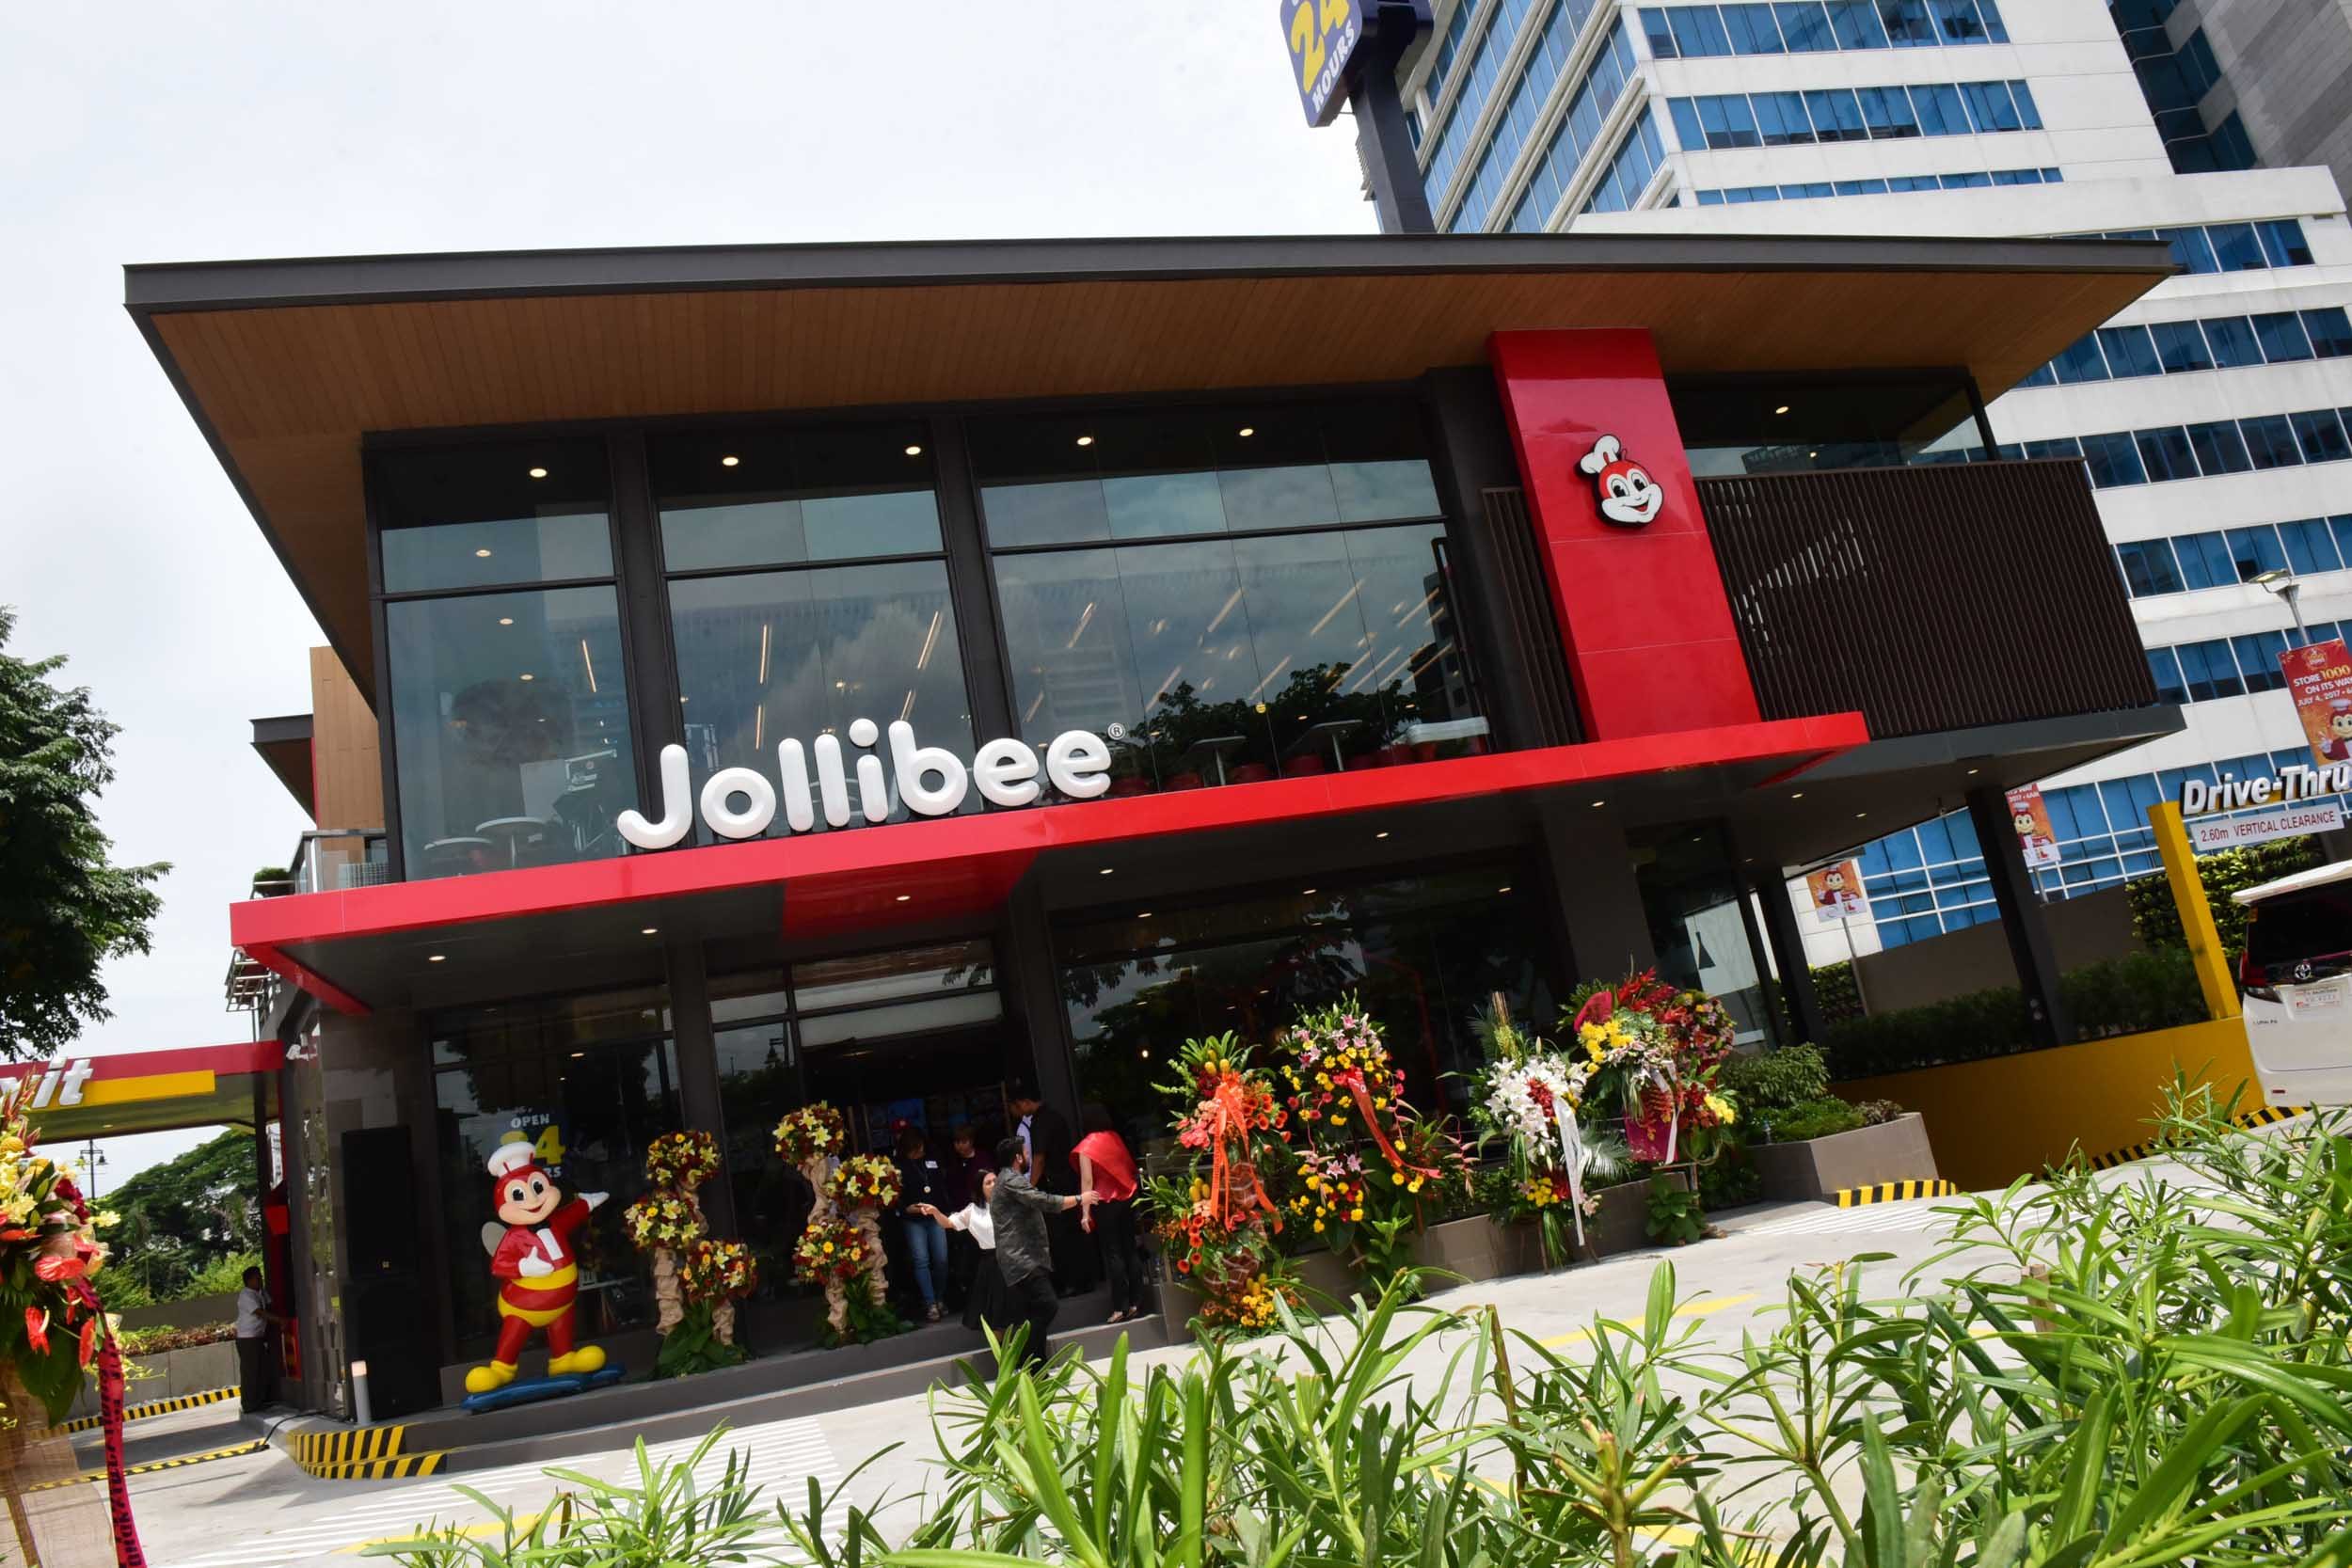 IN PHOTOS: Inside Jollibee’s 1,000th store